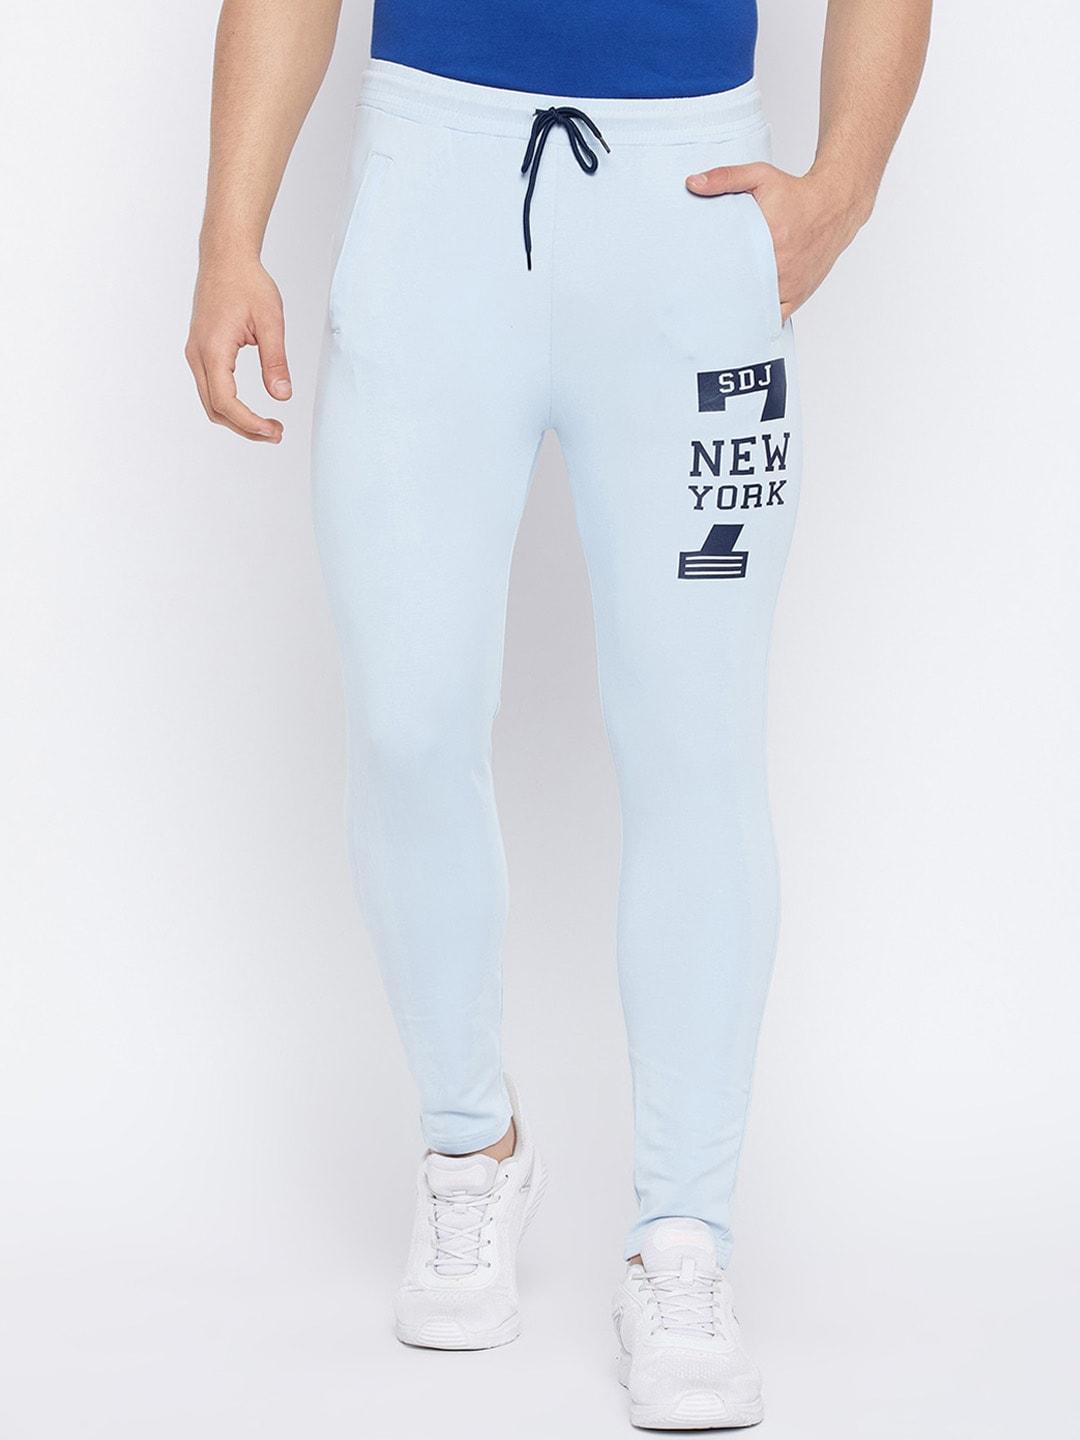 duke-men-printed-relaxed-fit-cotton-track-pants